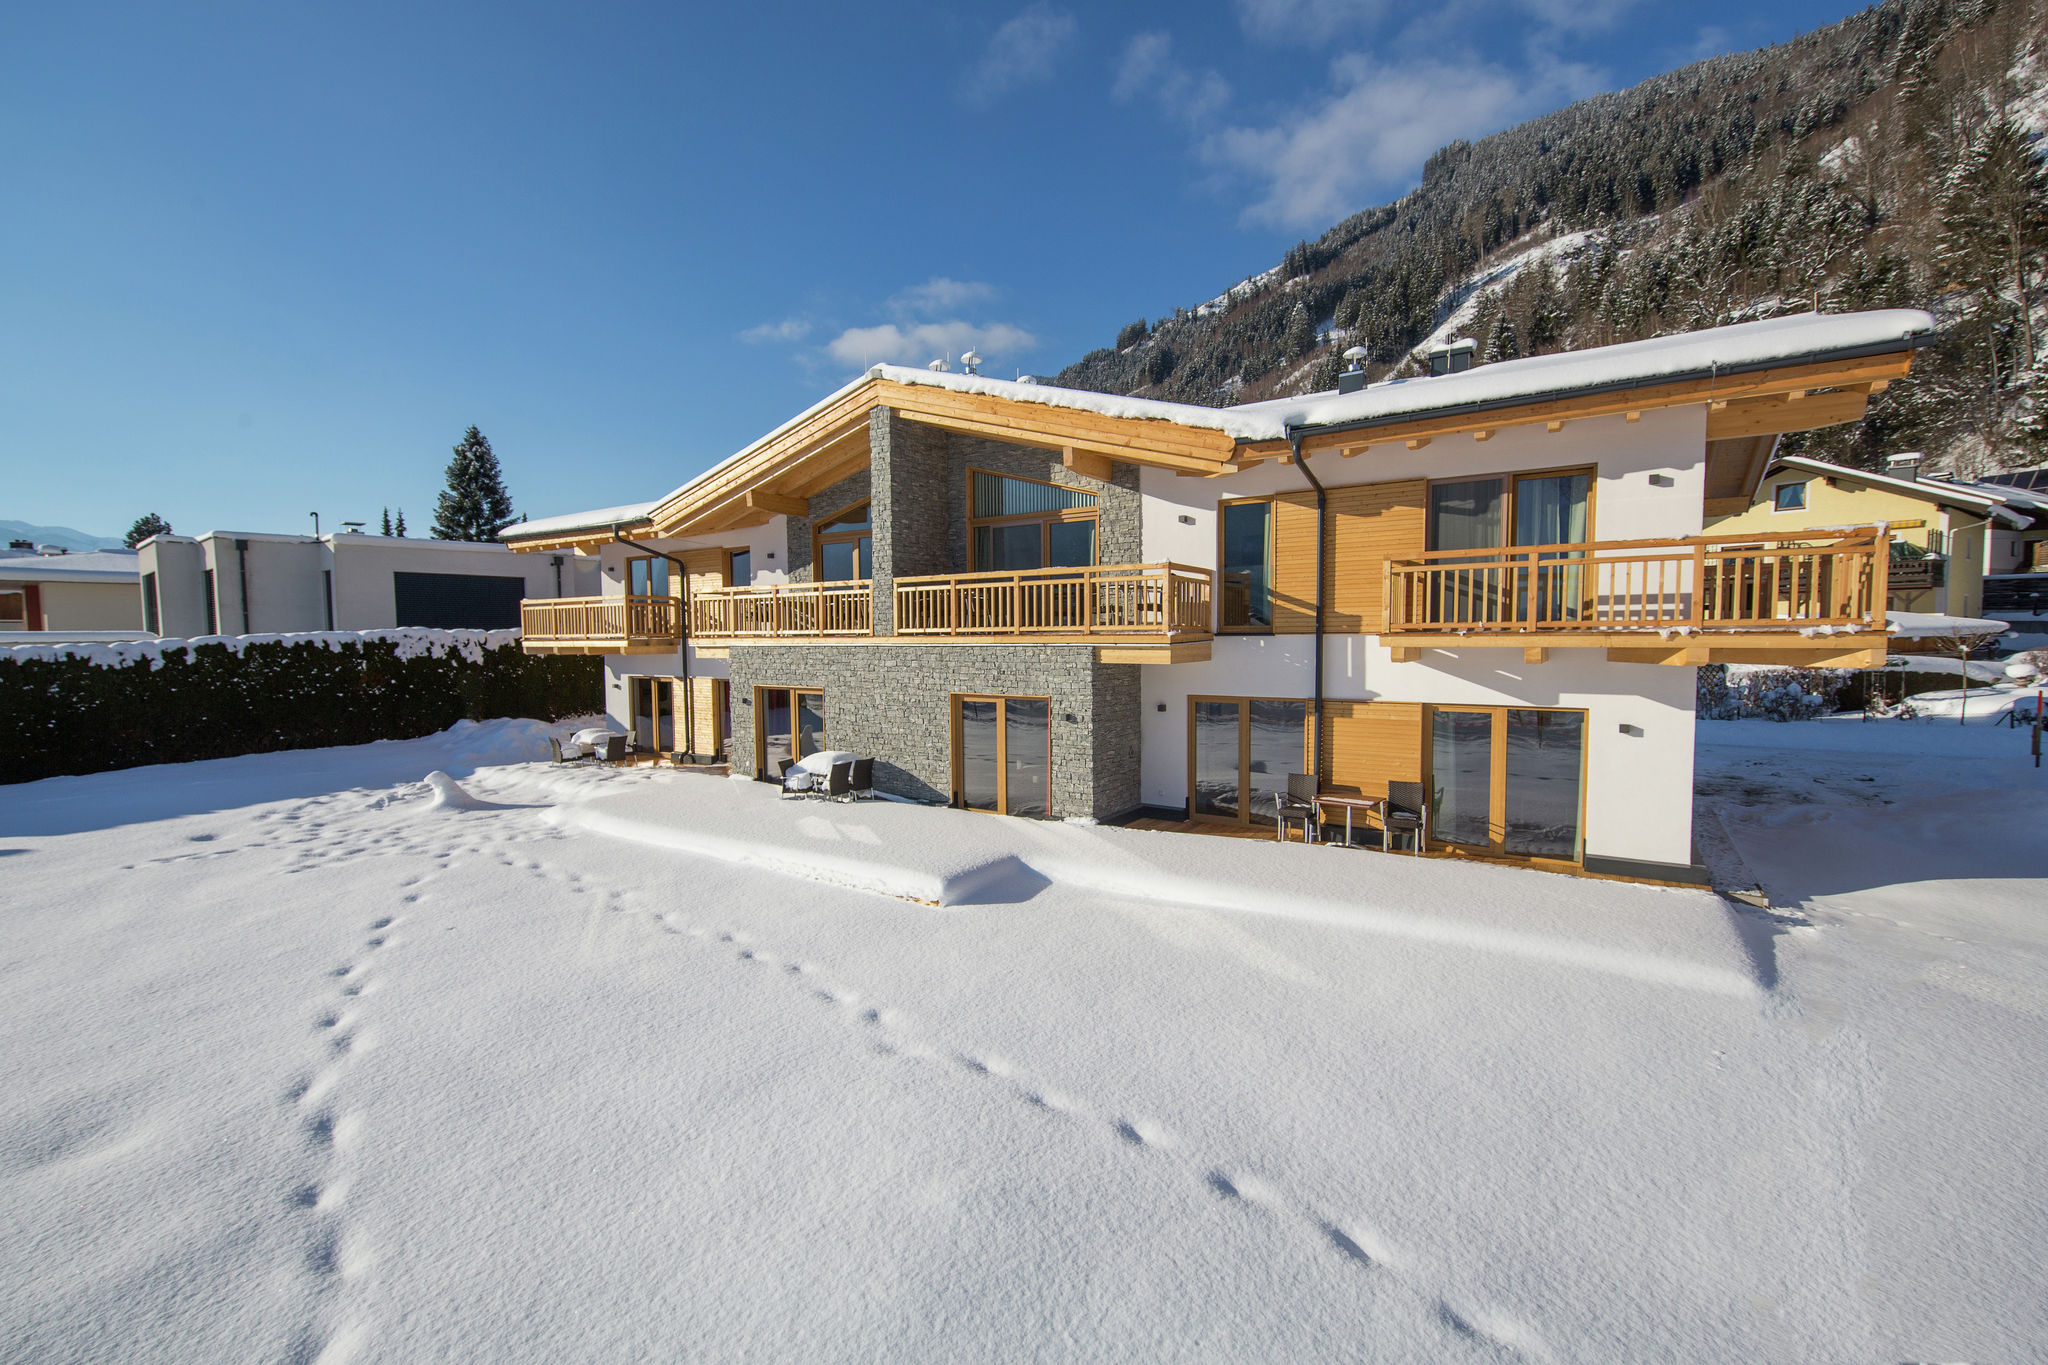 Luxurious Apartment in Zell am See near Ski Area